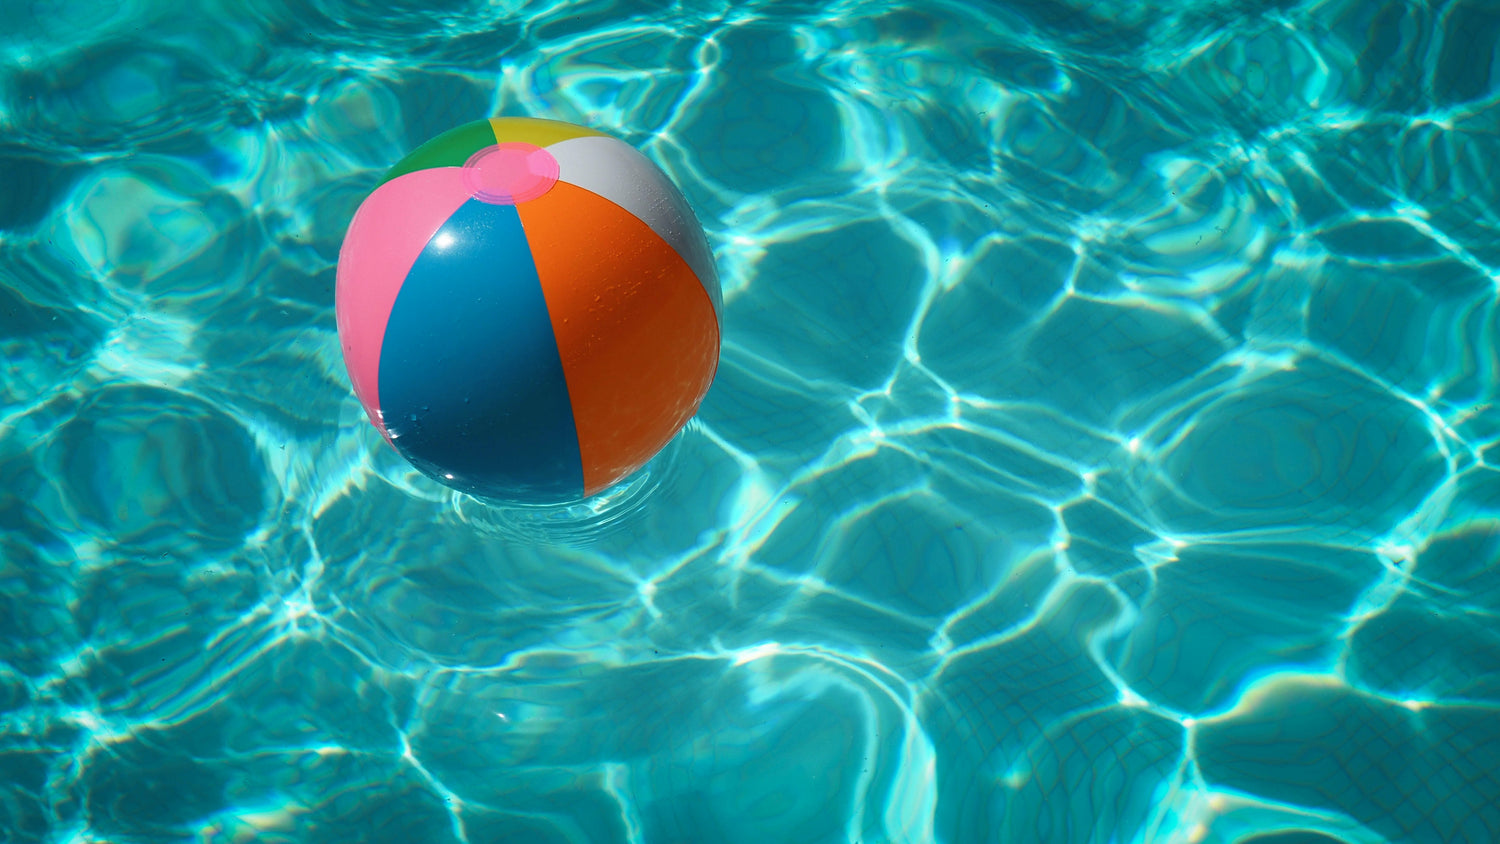 A colorful beach ball floating in a pool